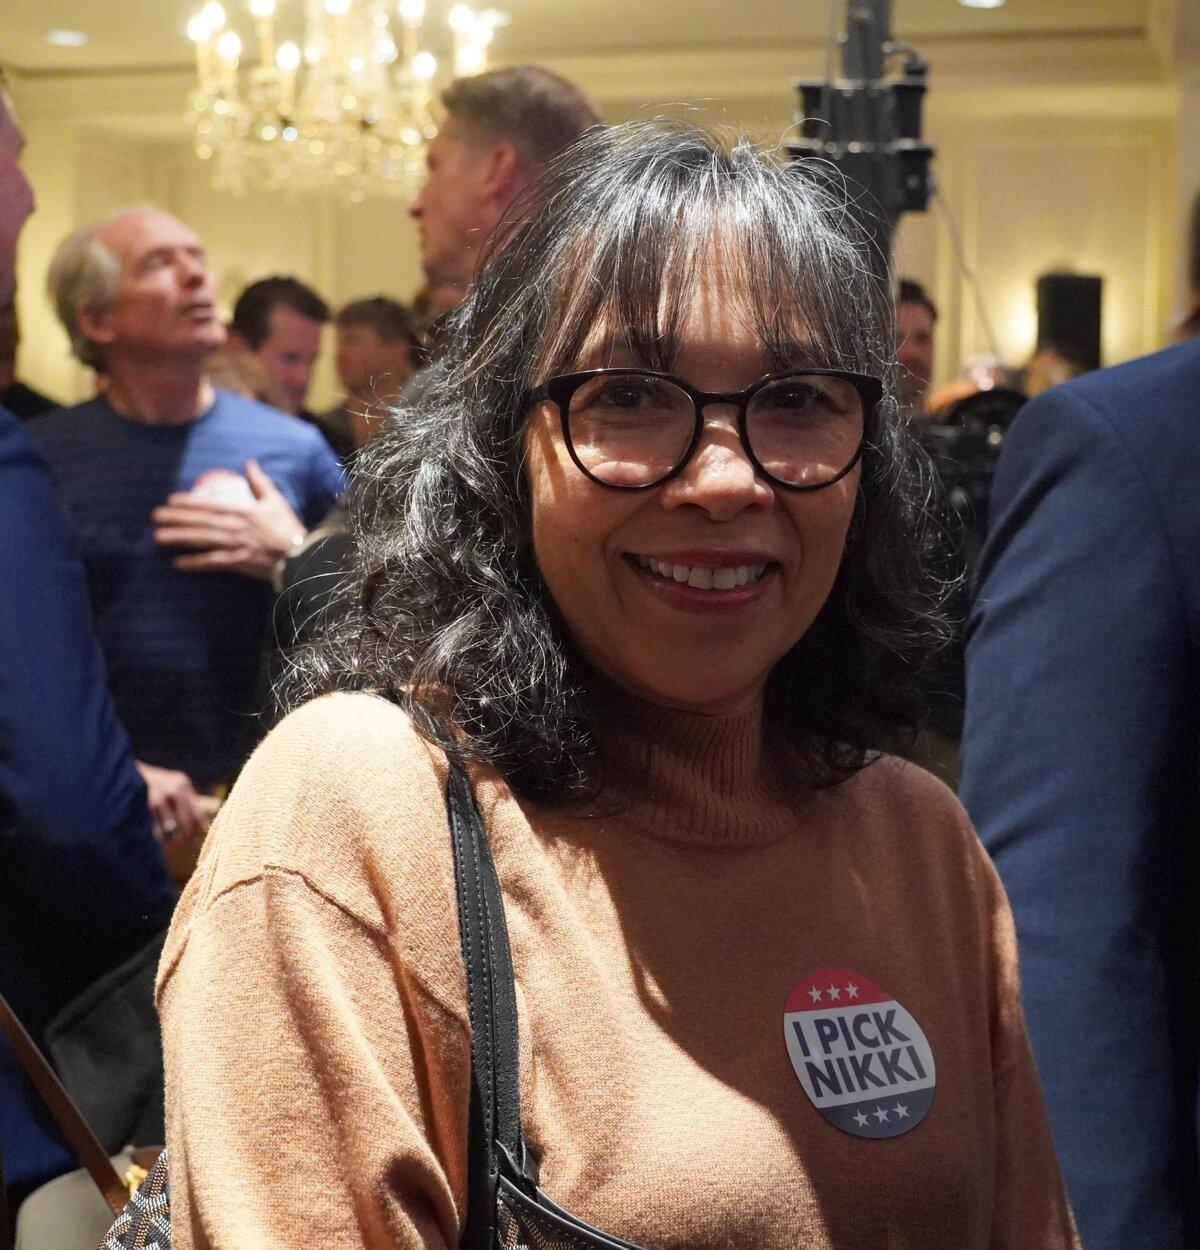 Gracita Novak, a supporter from Maryland, at a campaign event of Republican presidential candidate Nikki Haley in Washington on March 1, 2024. (Terri Wu/The Epoch Times)